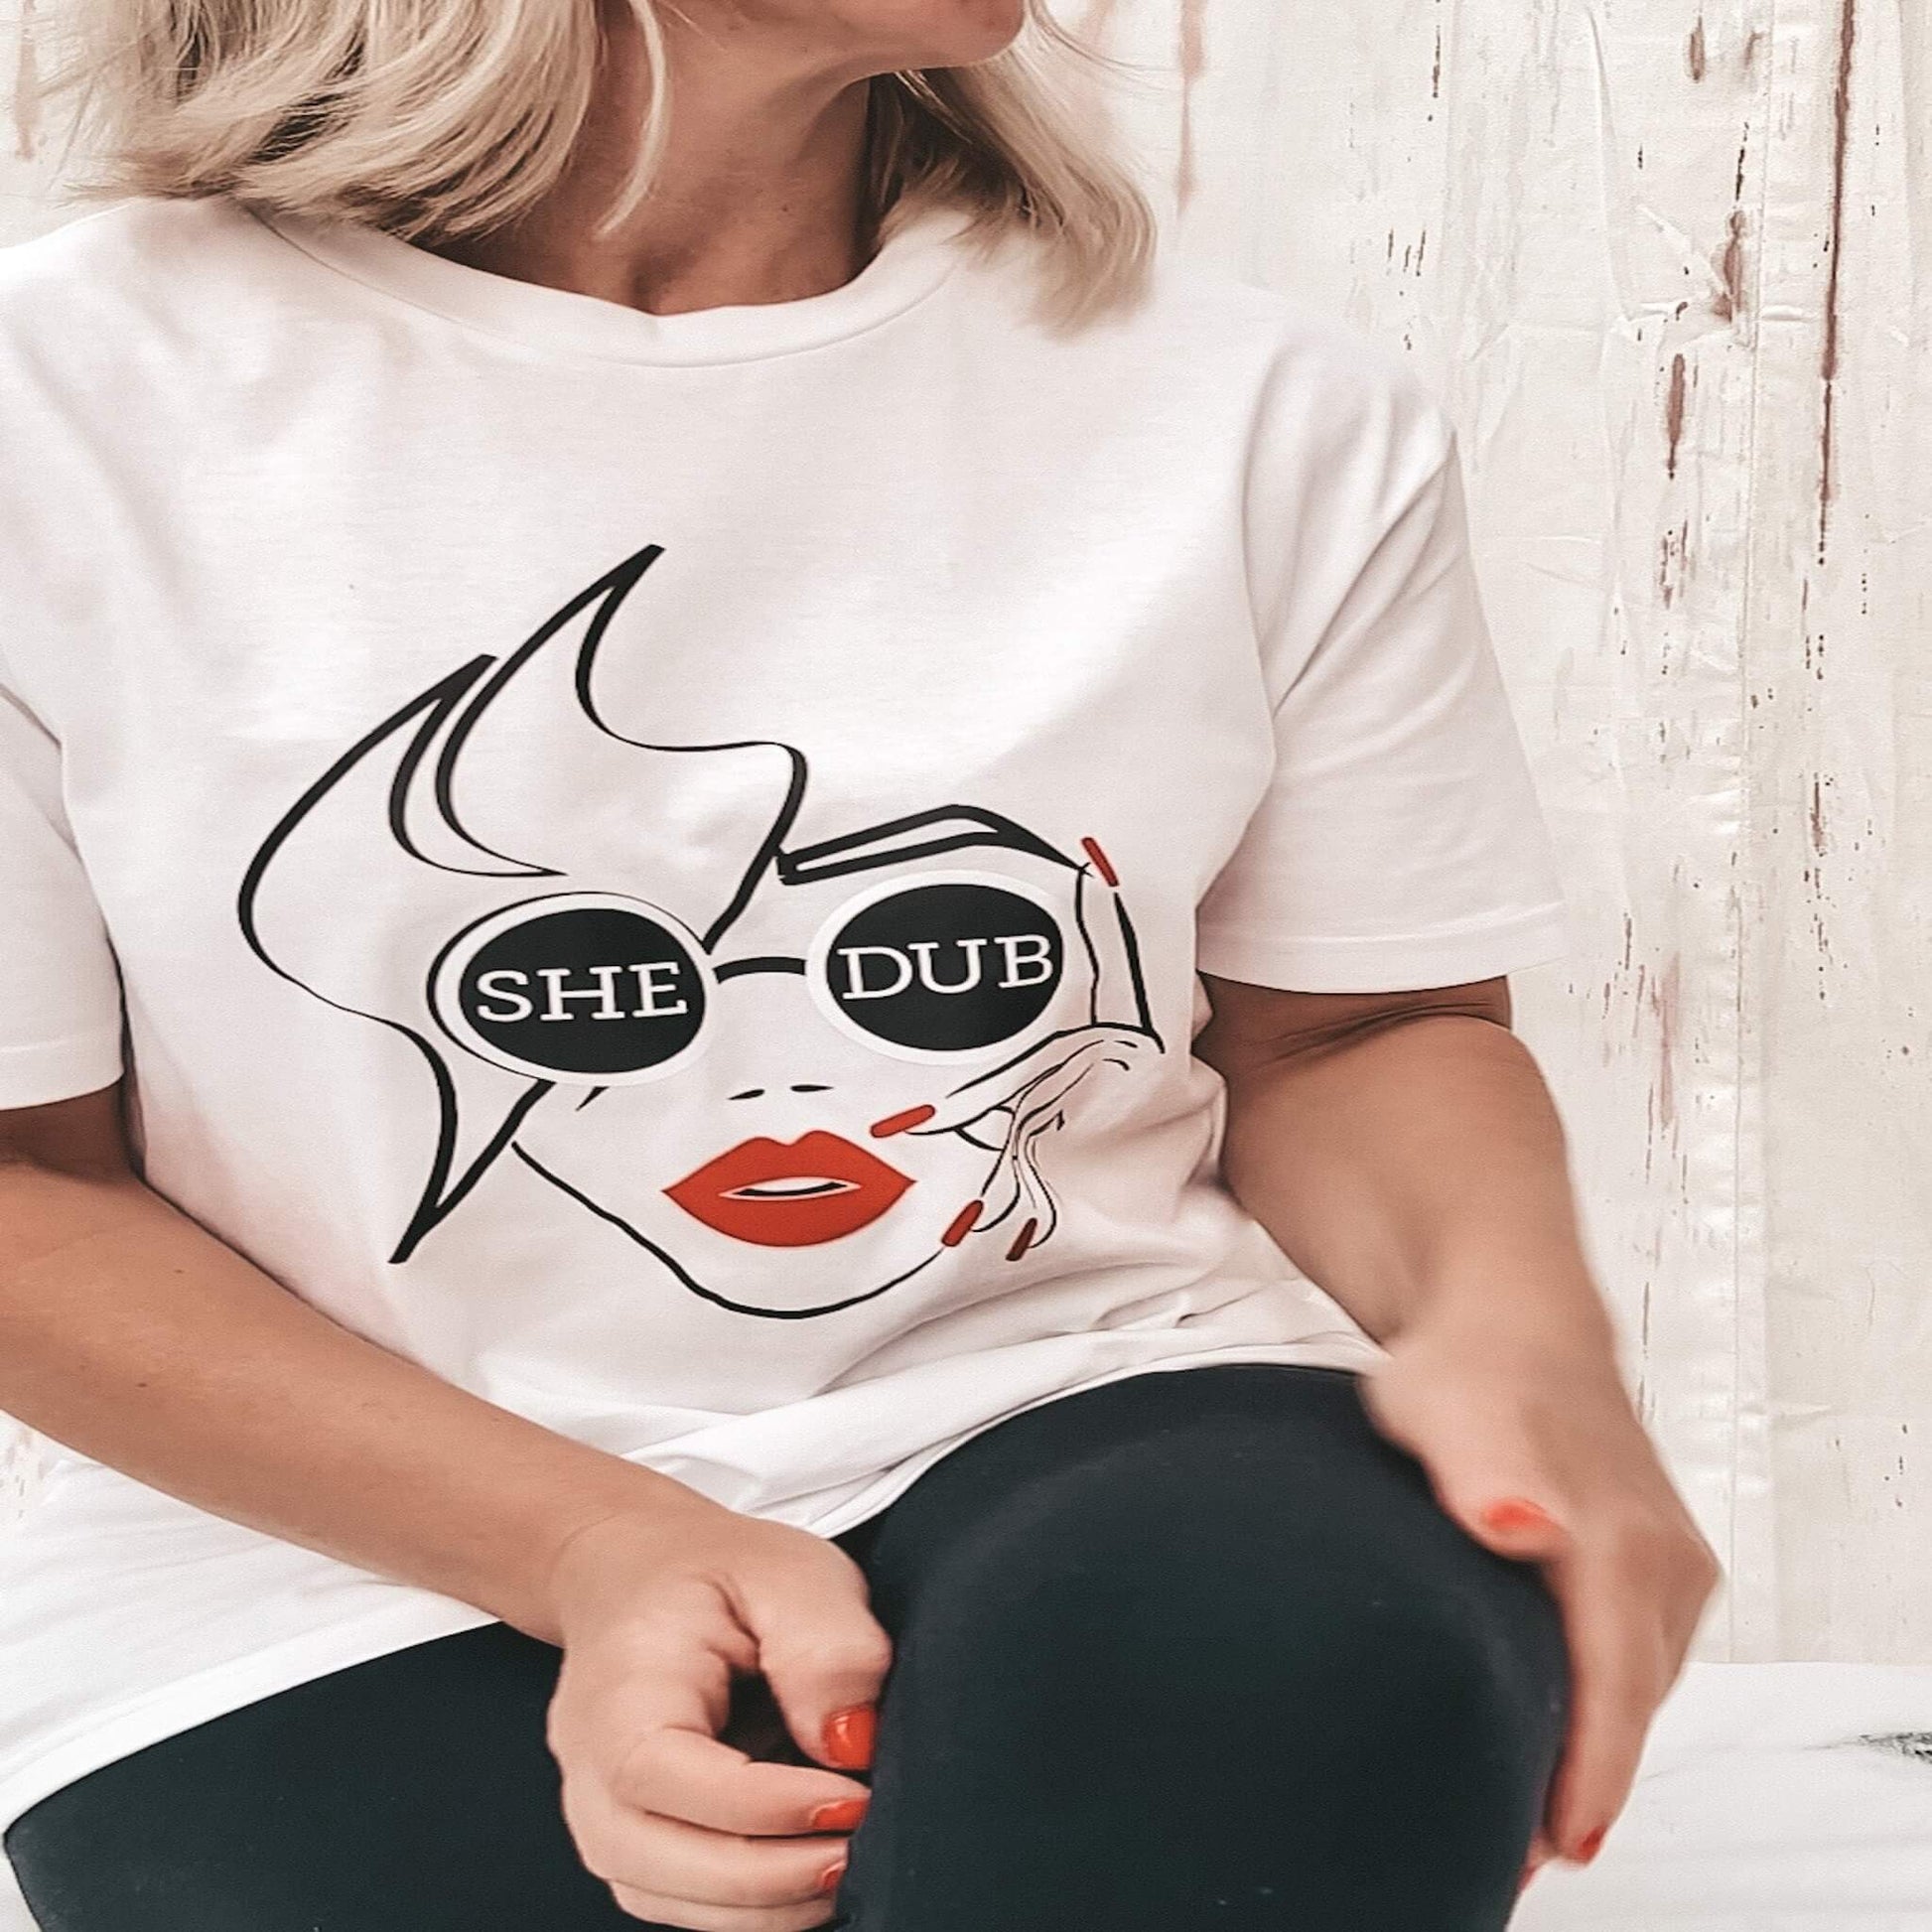 White T shirt with Shedub logo, line art ladies face with shedub round sunglasses, red lips and red finger nails. stand out.